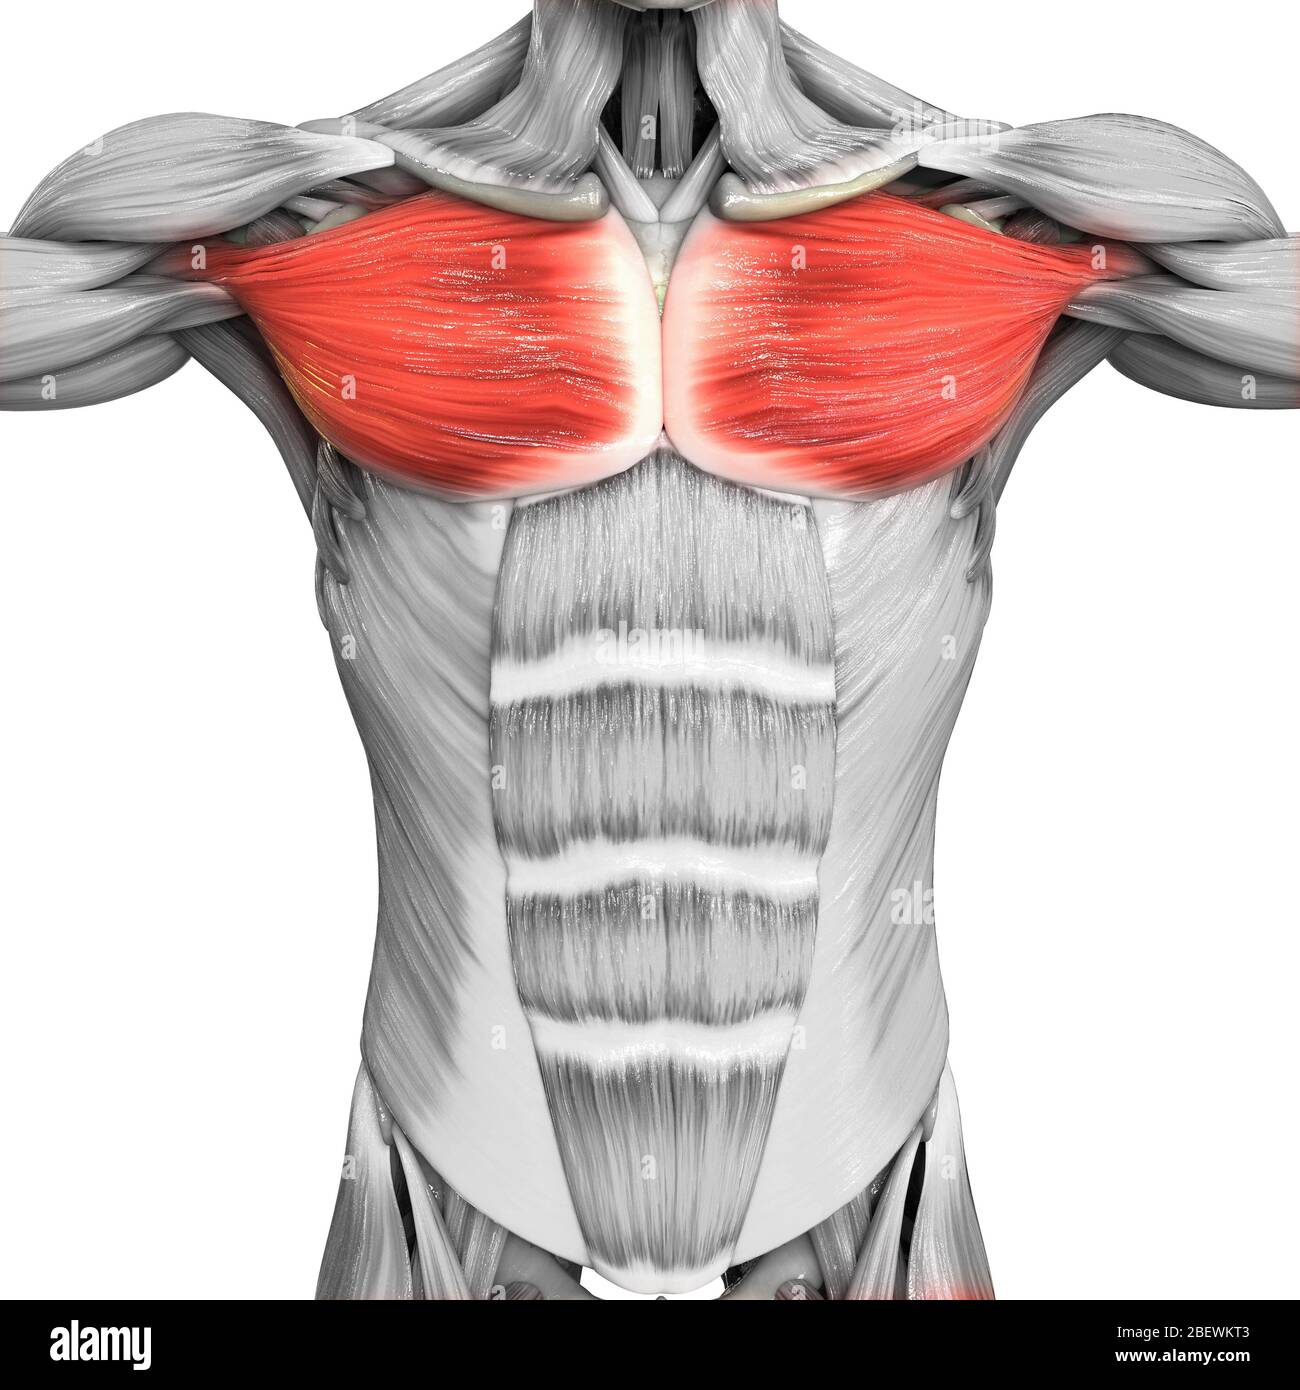 Human Muscular System Parts Pectoral Muscle Anatomy Stock Photo